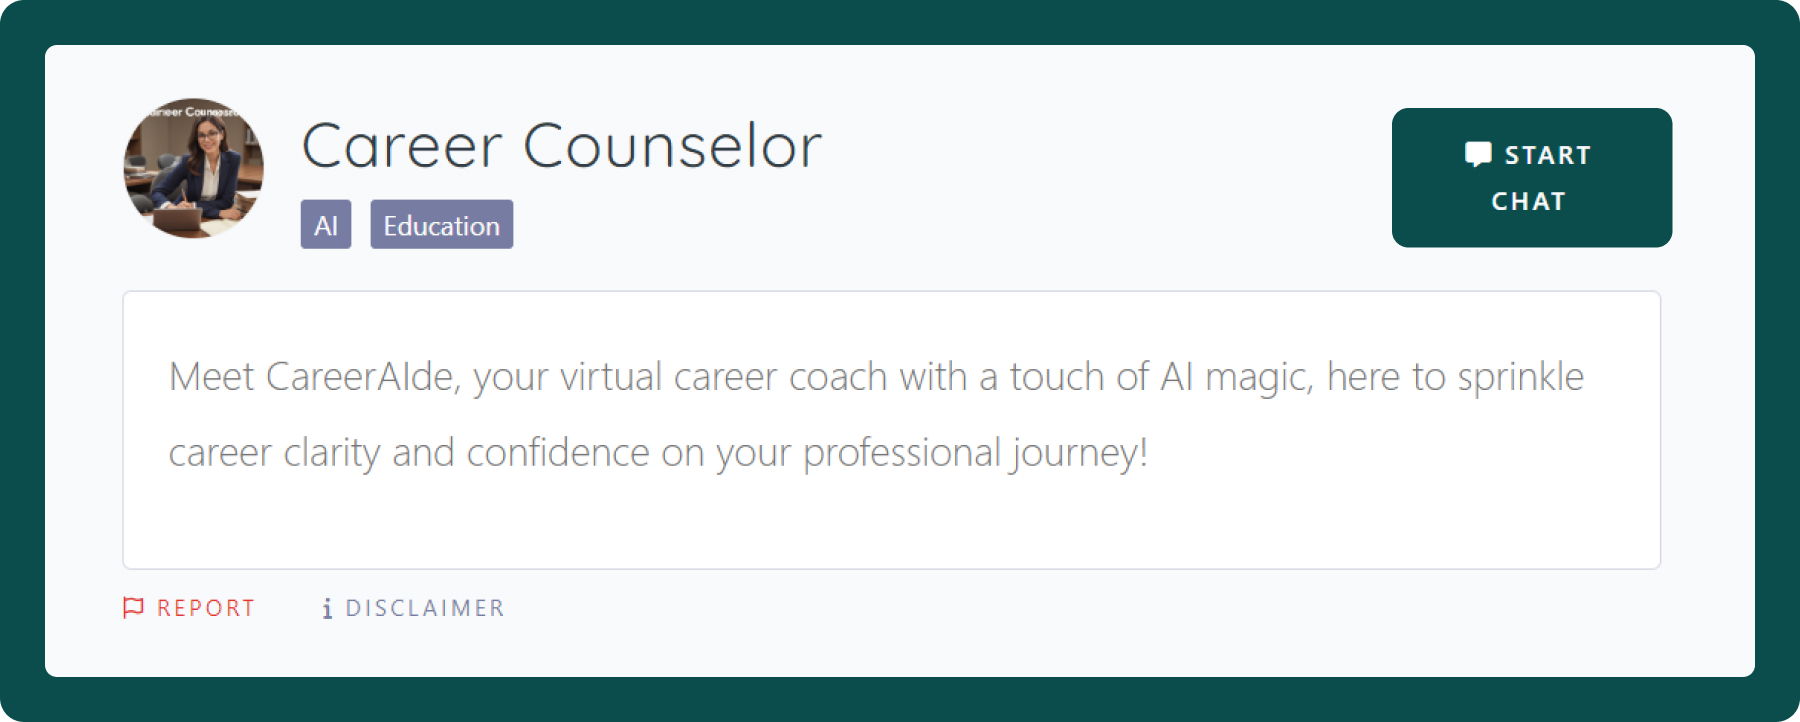 Talk to AI character Career Counselor  